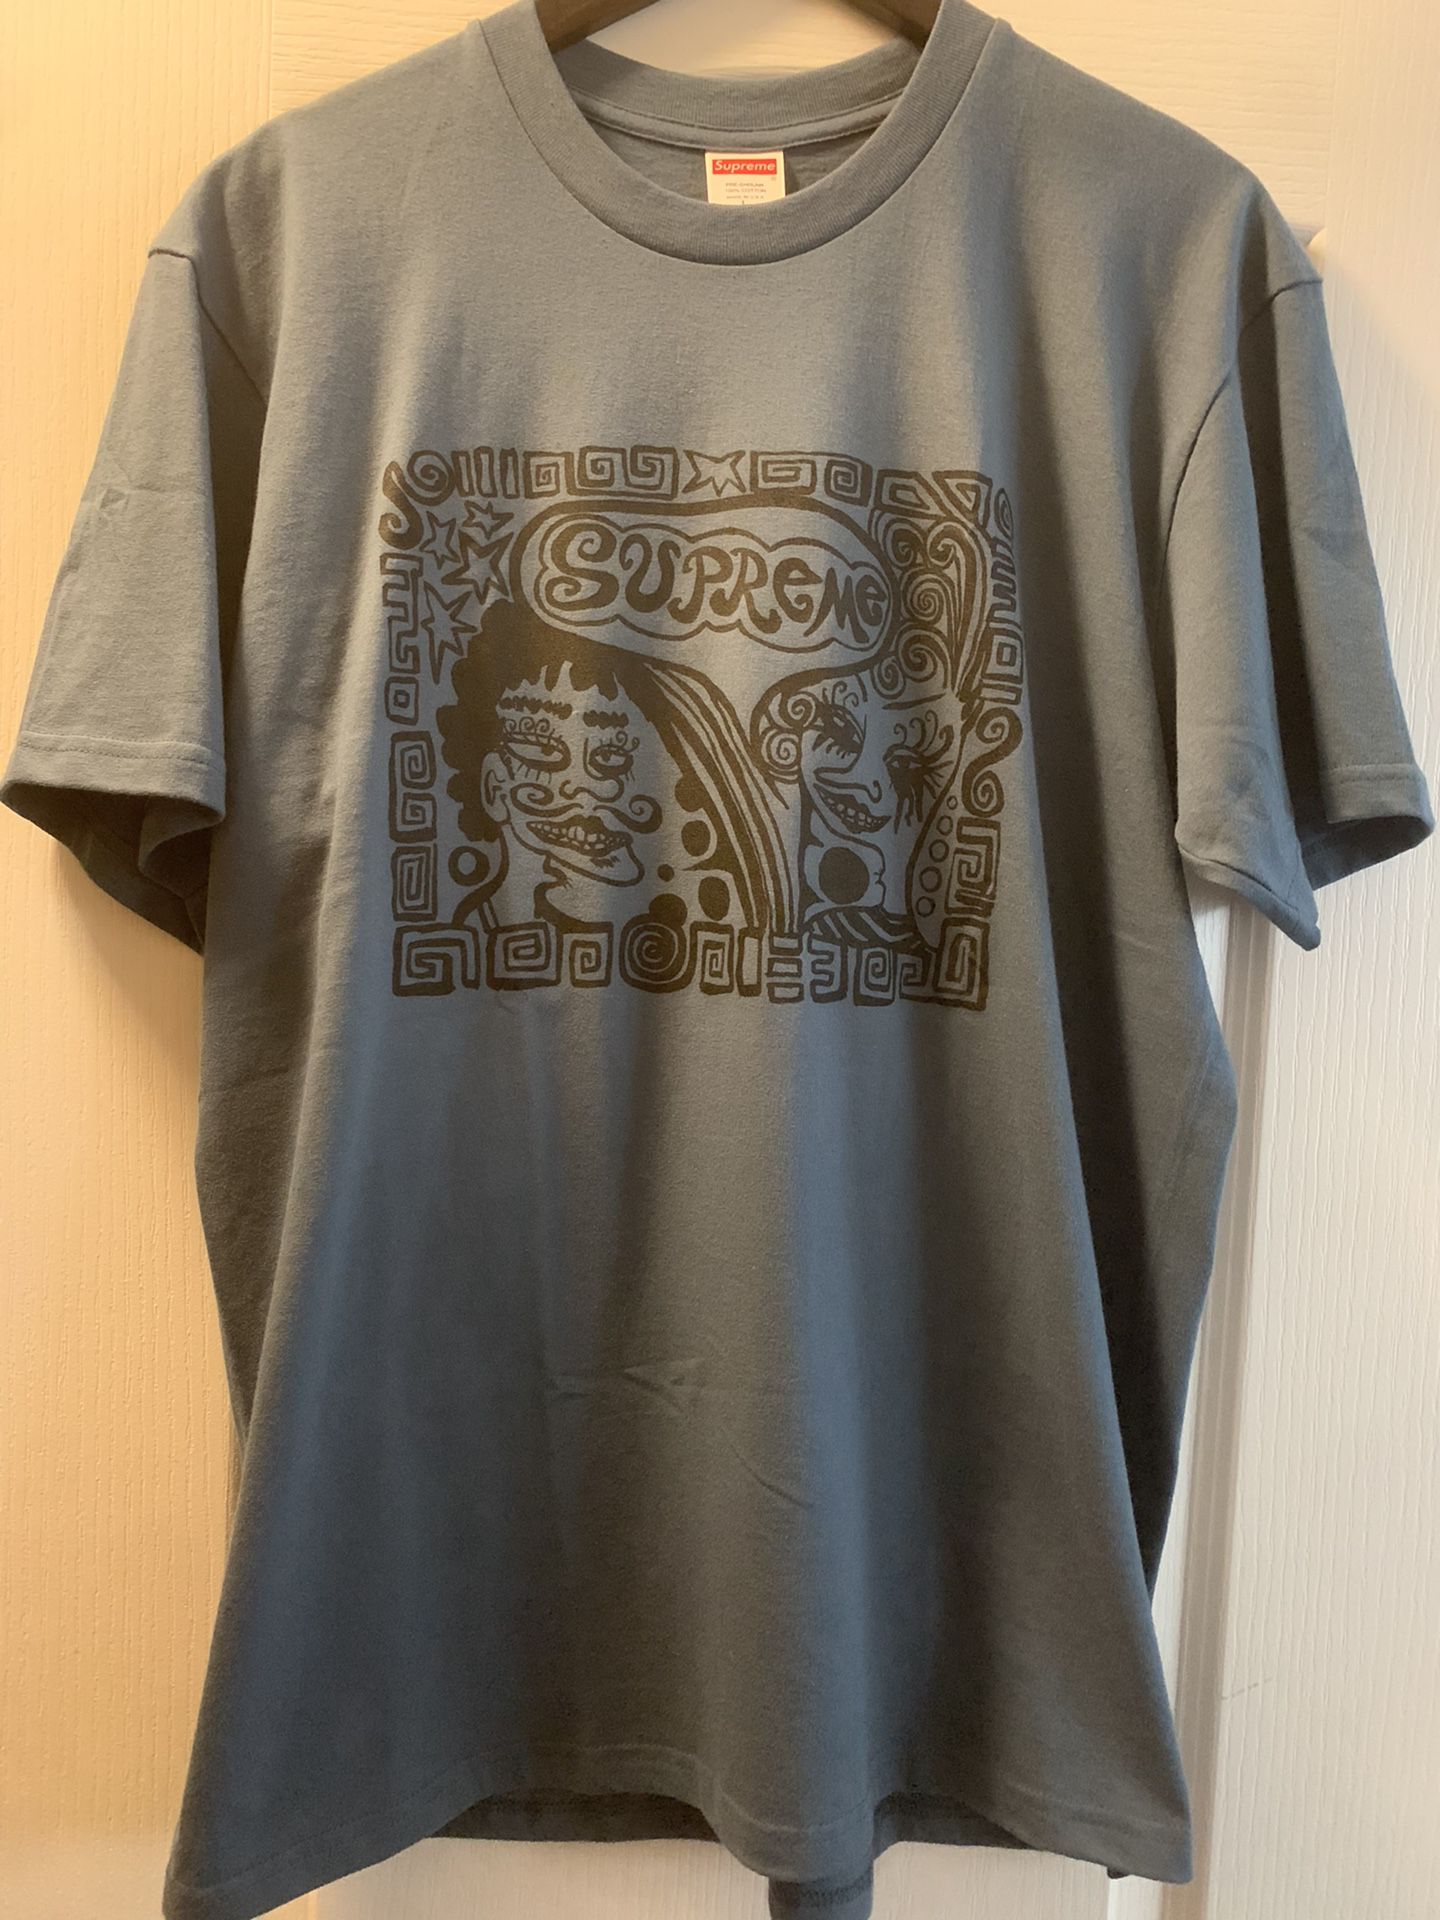 Supreme faces Tee Brand New Size L